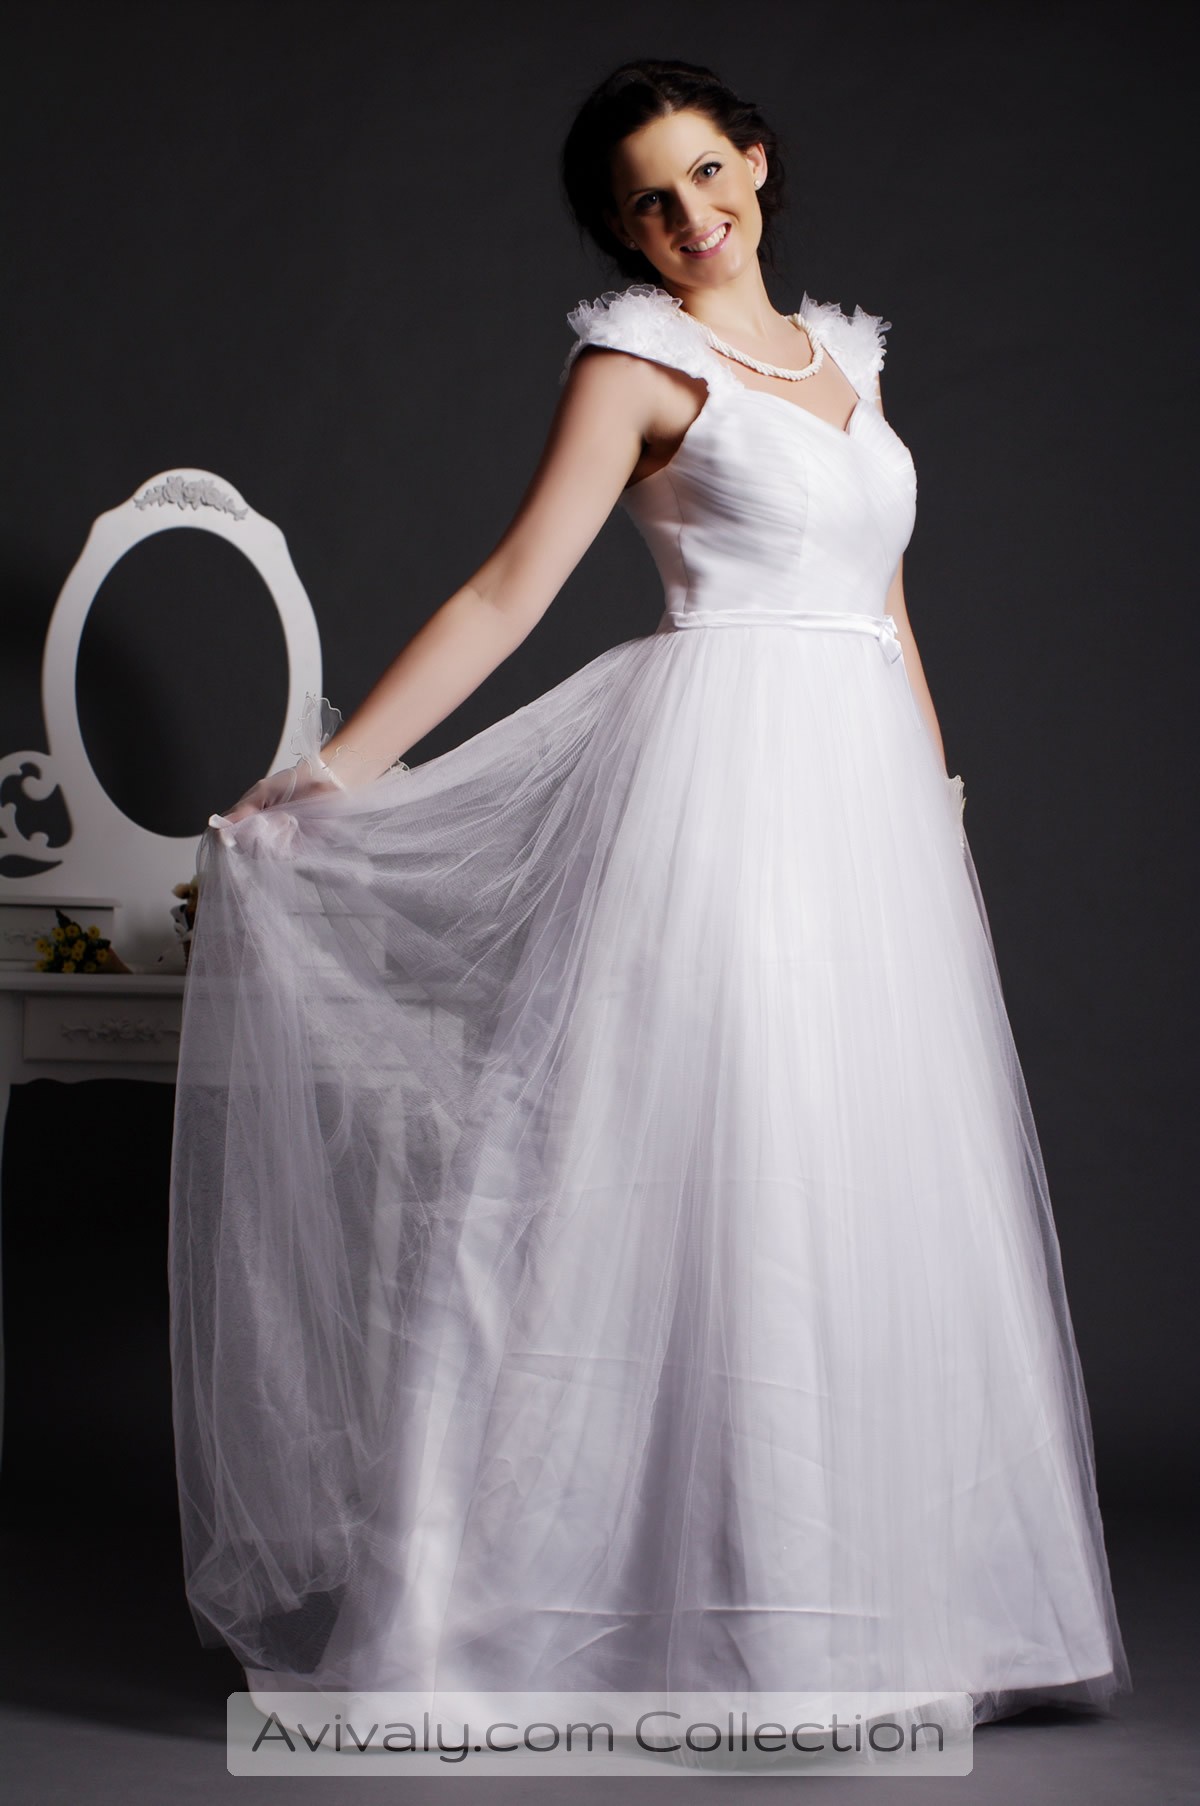 Lapa - Fluffy Cap Sleeves Sweetheart Dress Tailored in Tulle with Pleated Skirt